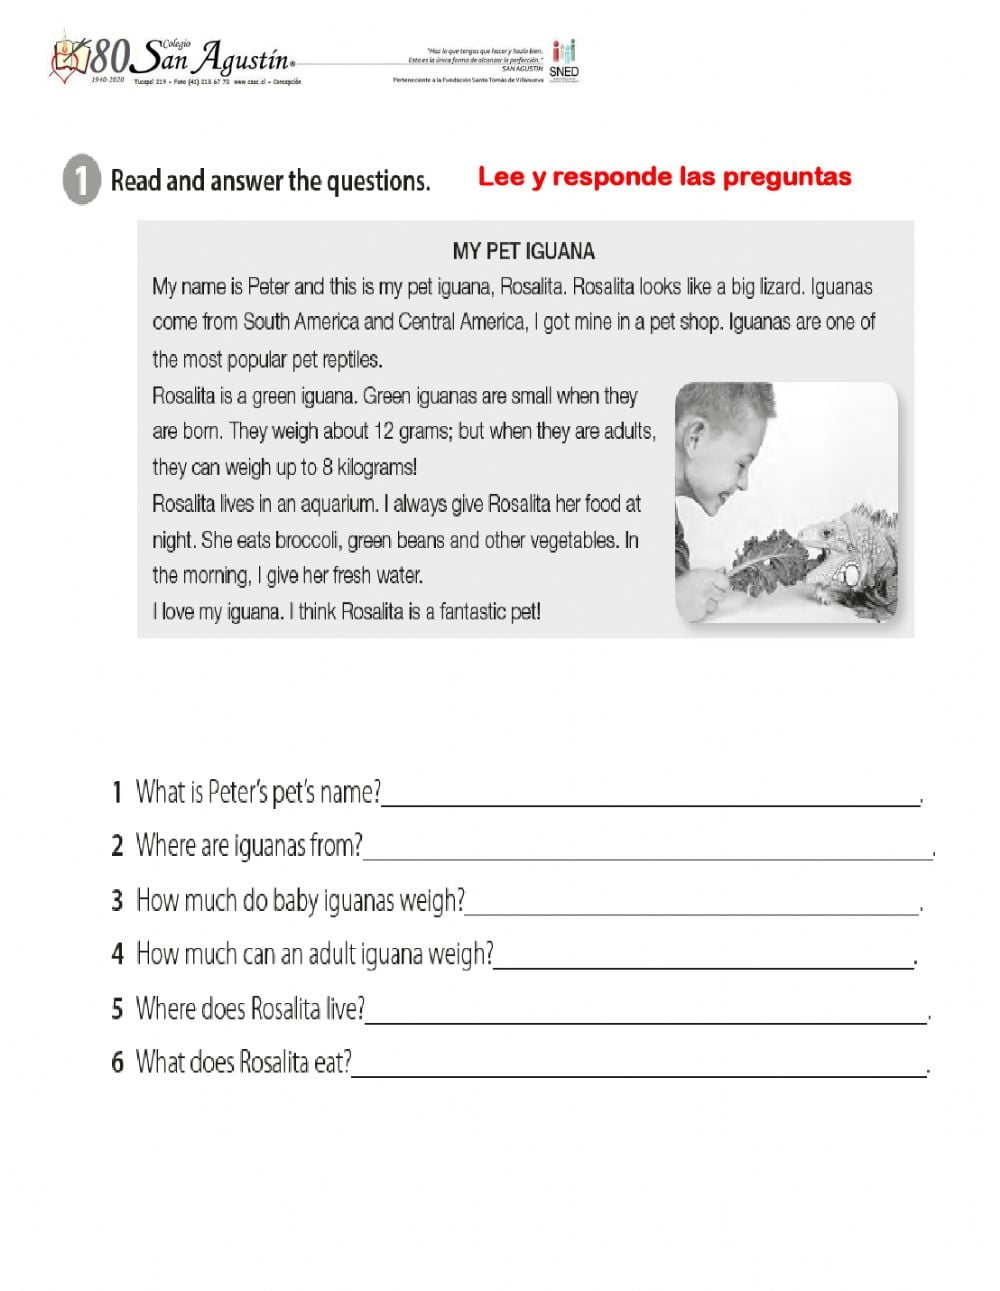 reading comprehension worksheets 5th grade multiple choice